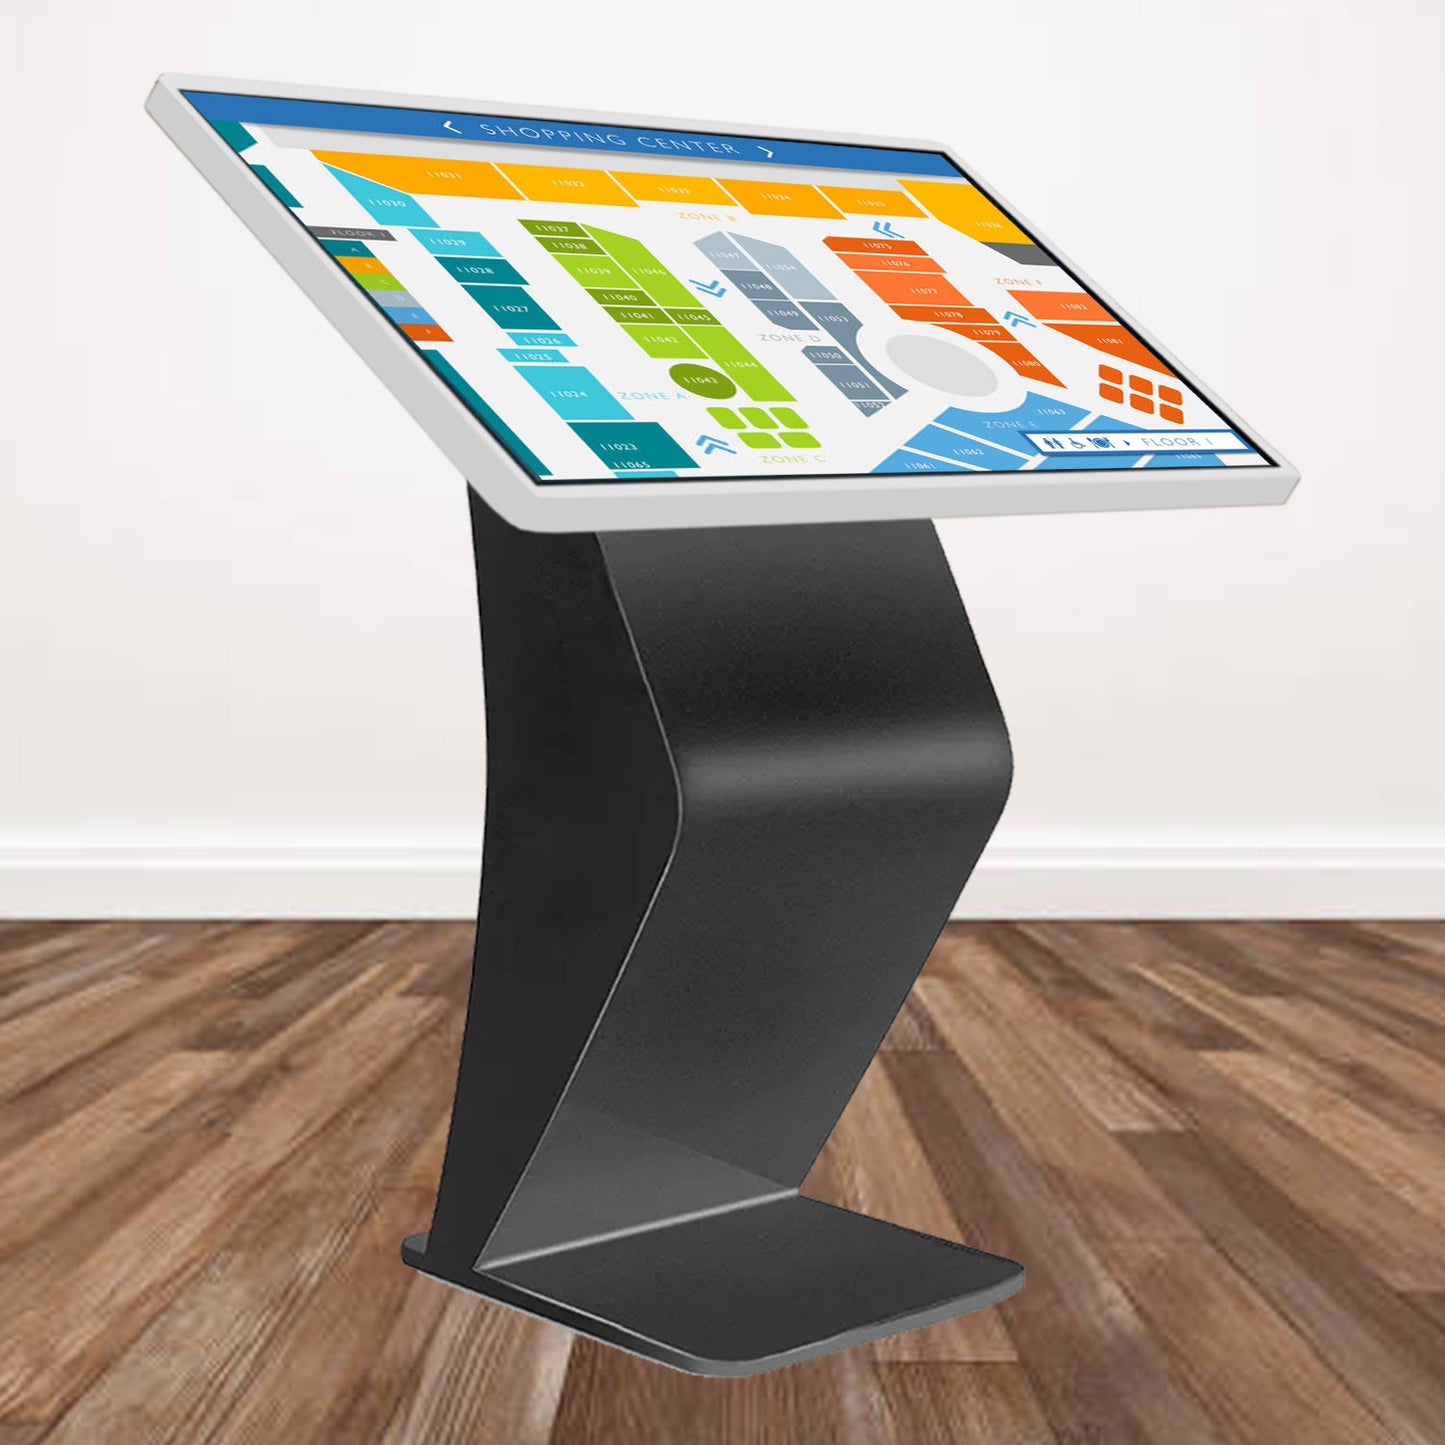 55" Touch Screen K  Interactive Display Kiosk